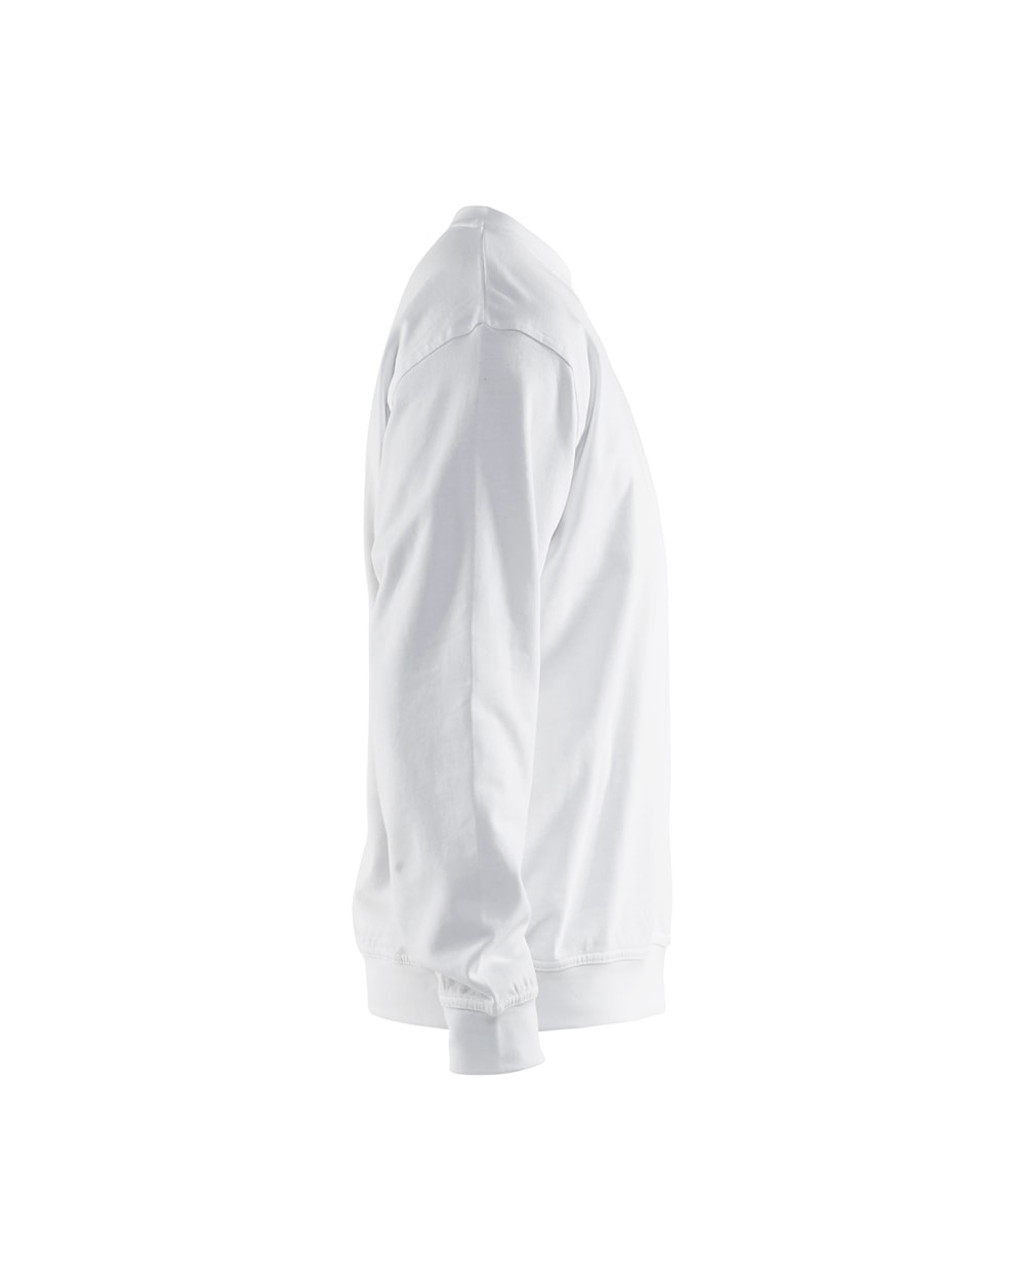 Buy online in Painters Pullover 3340 for Painters that are comfortable and durable.